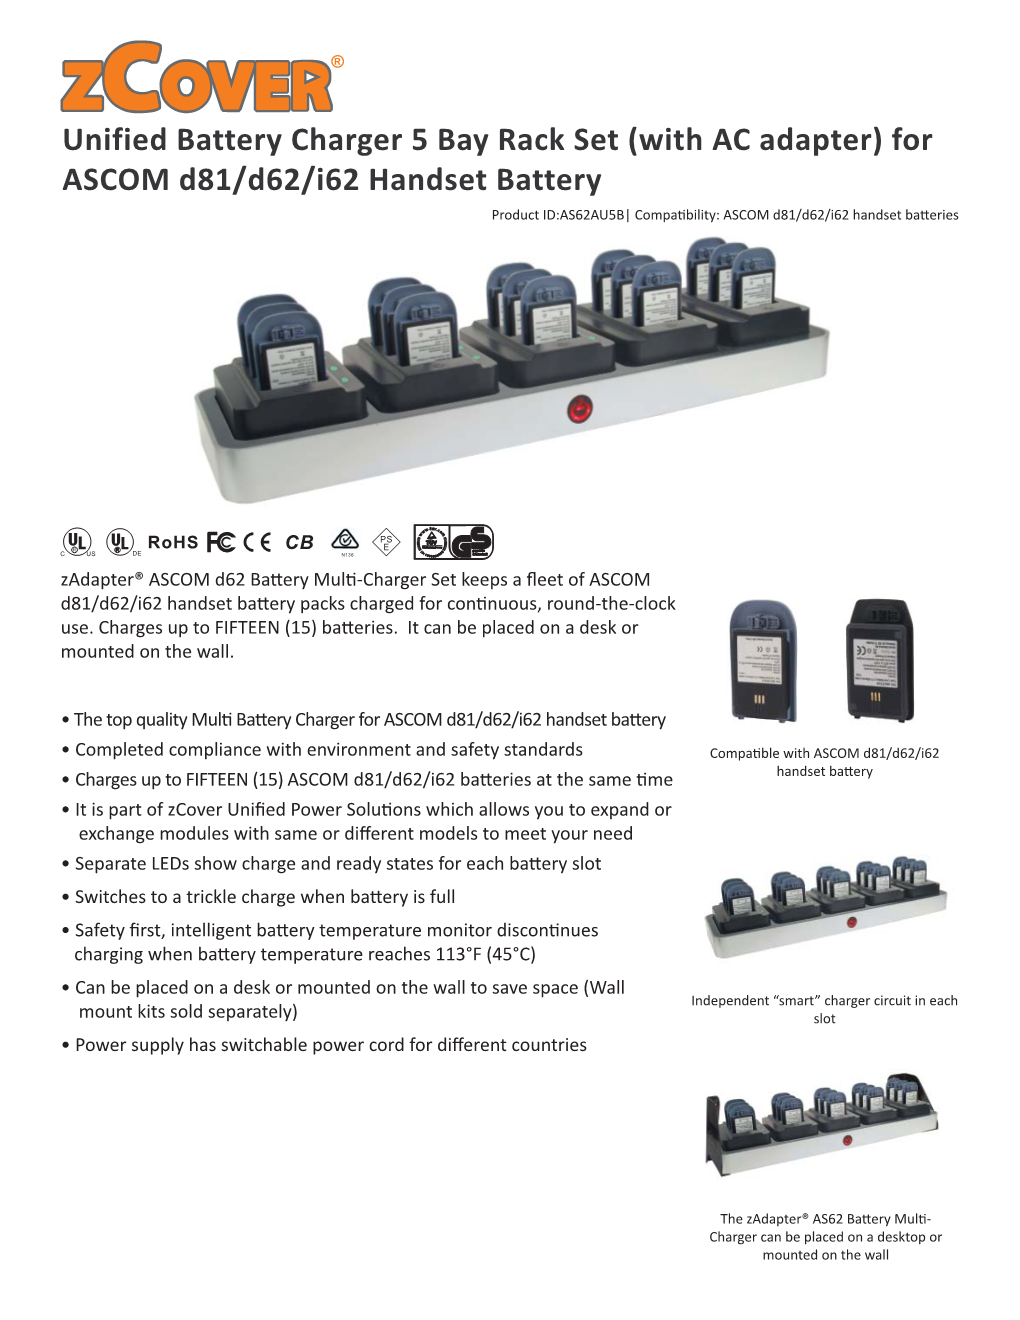 Unified Battery Charger 5 Bay Rack Set (With AC Adapter) for ASCOM D81/D62/I62 Handset Battery Product ID:AS62AU5B| Compa� Bility: ASCOM D81/D62/I62 Handset Ba� Eries